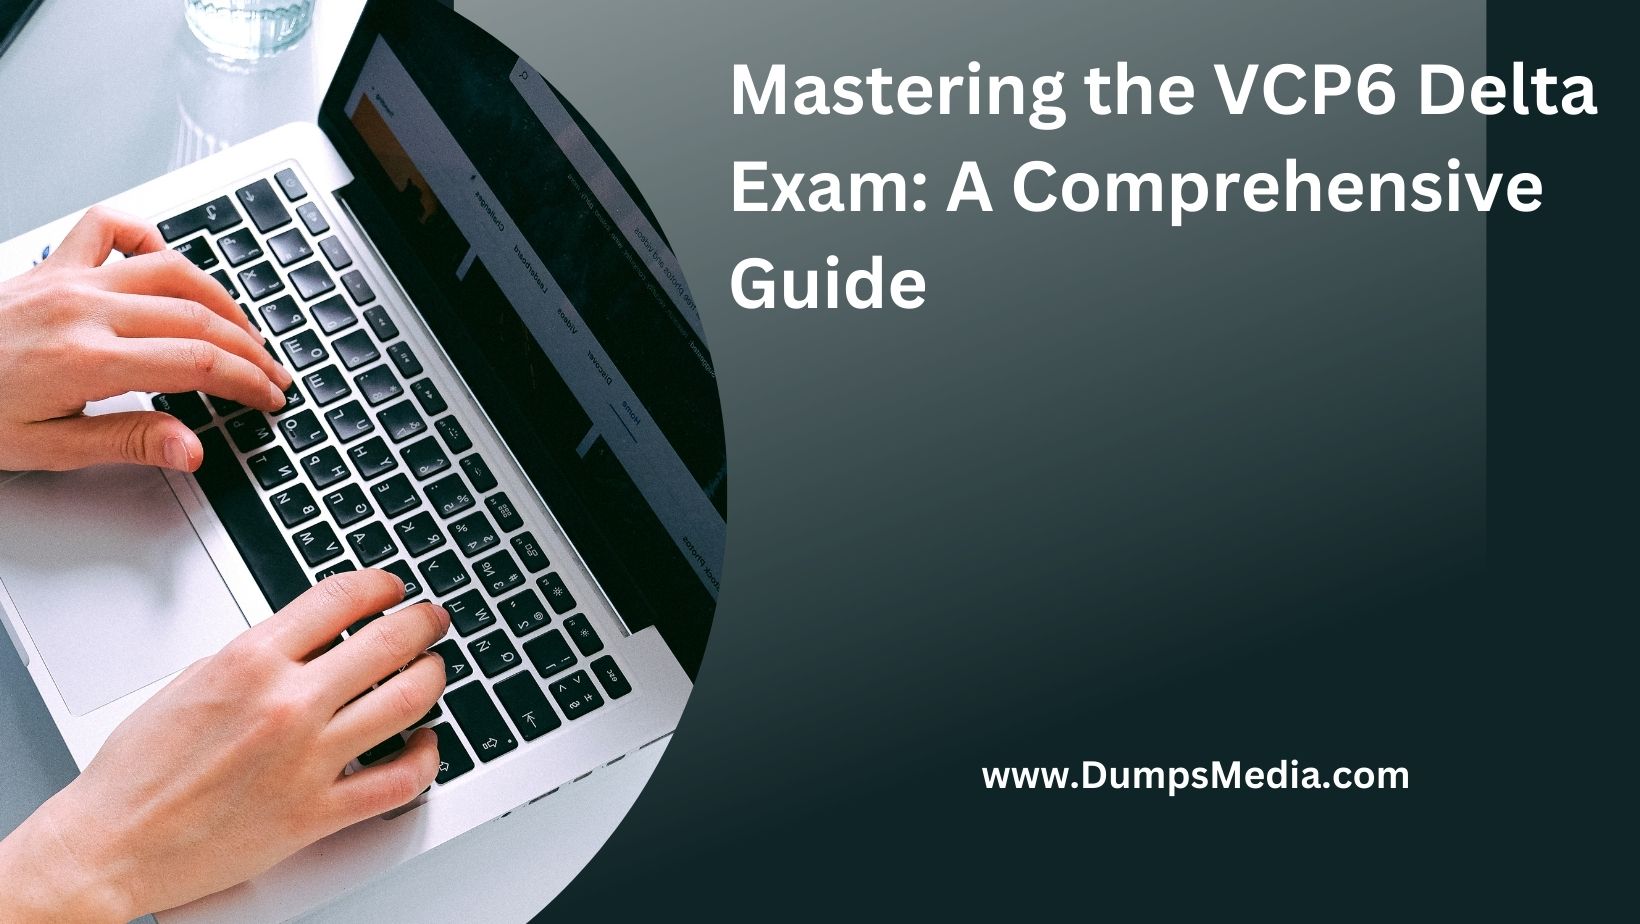 Mastering the VCP6 Delta Exam Dump: A Comprehensive Guide